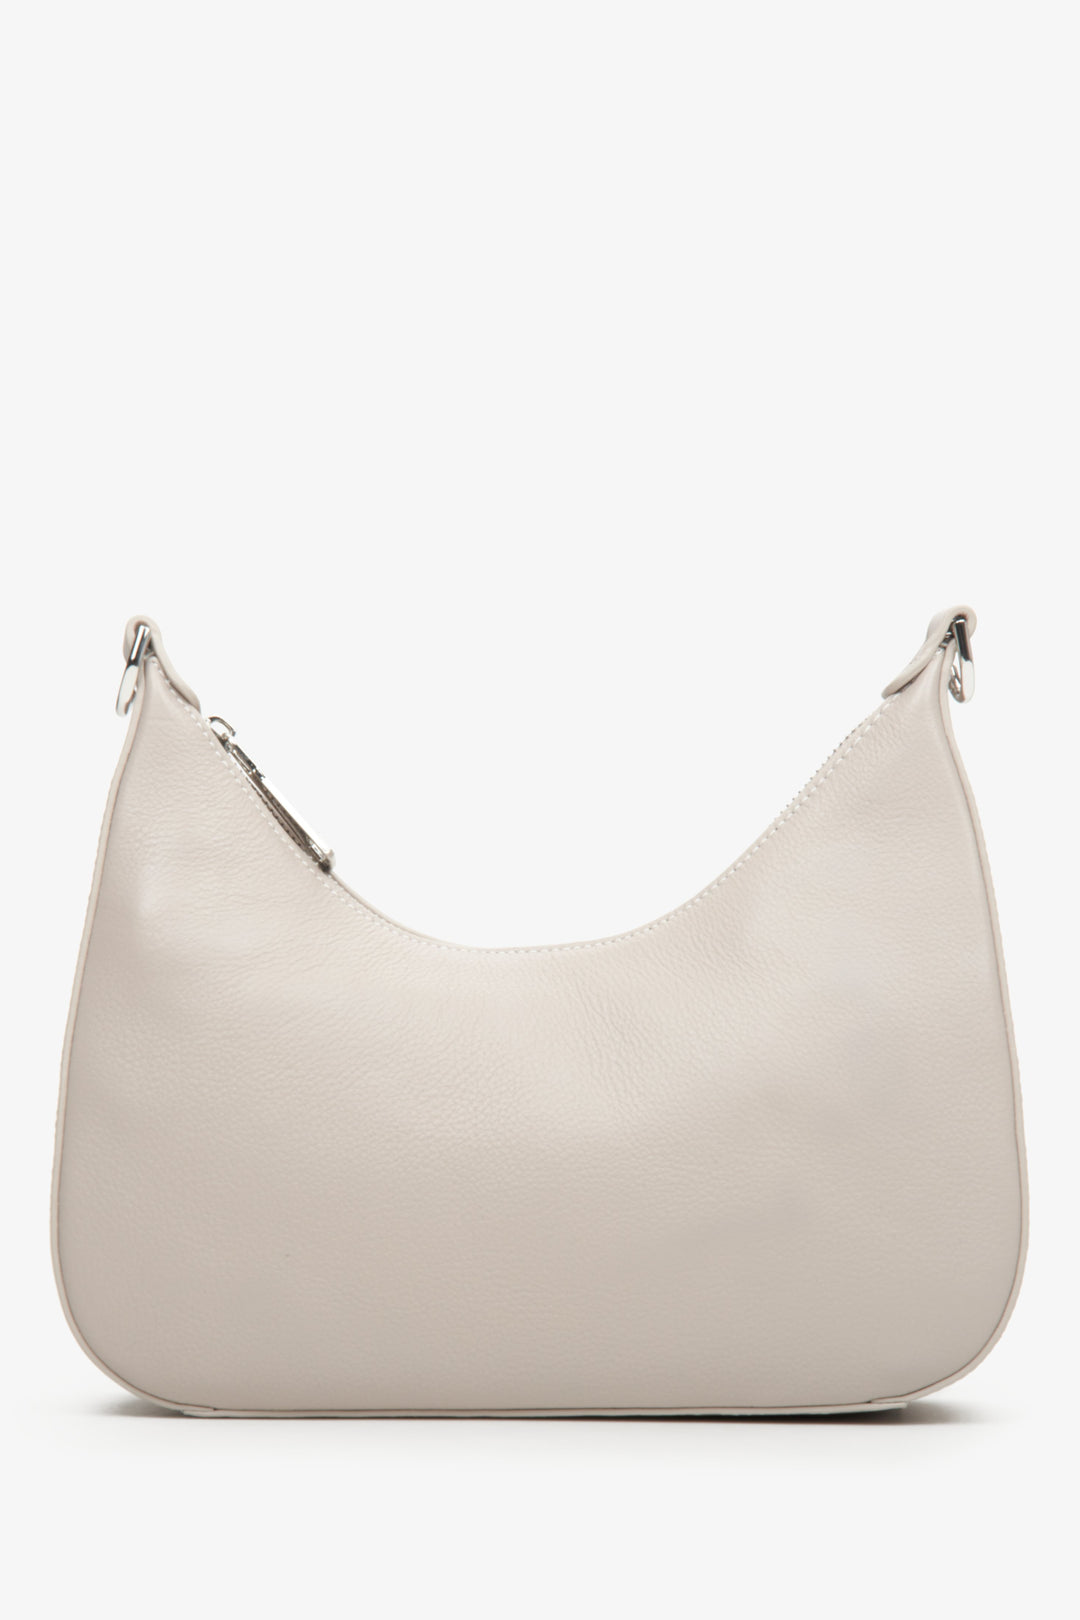 Women's light beige baguette bag by Estro - perfect for fall.